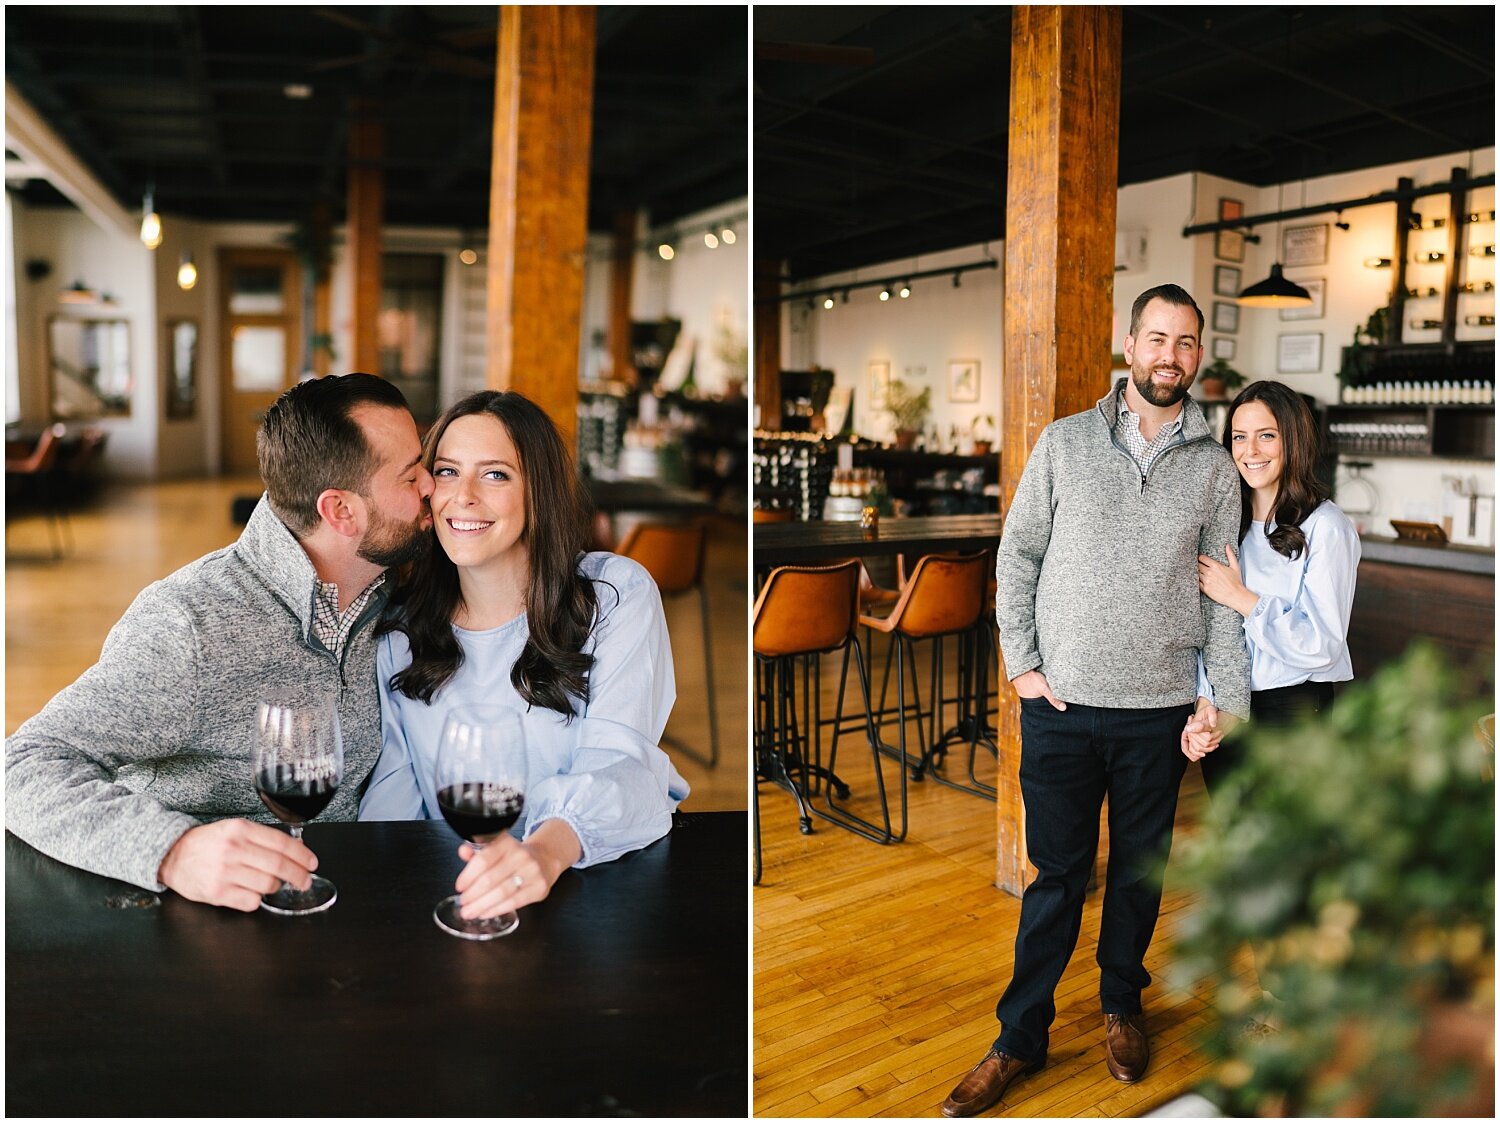 living+roots+wine+engagement+session+rochester+ny+wedding+photographer (12).jpg